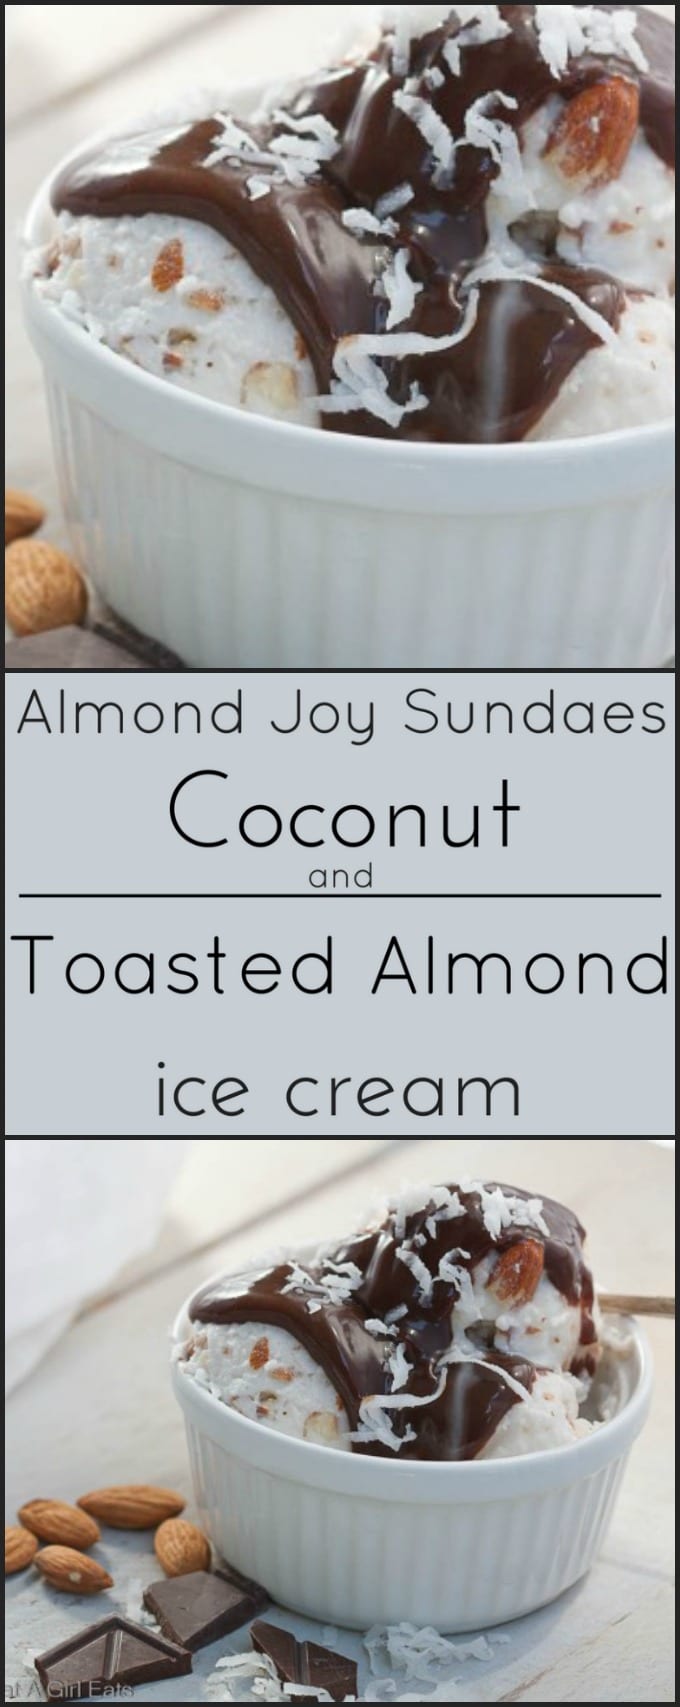 Coconut and Toasted Almond ice cream! Like an Almond Joy, but cold and creamy! Gluten free!